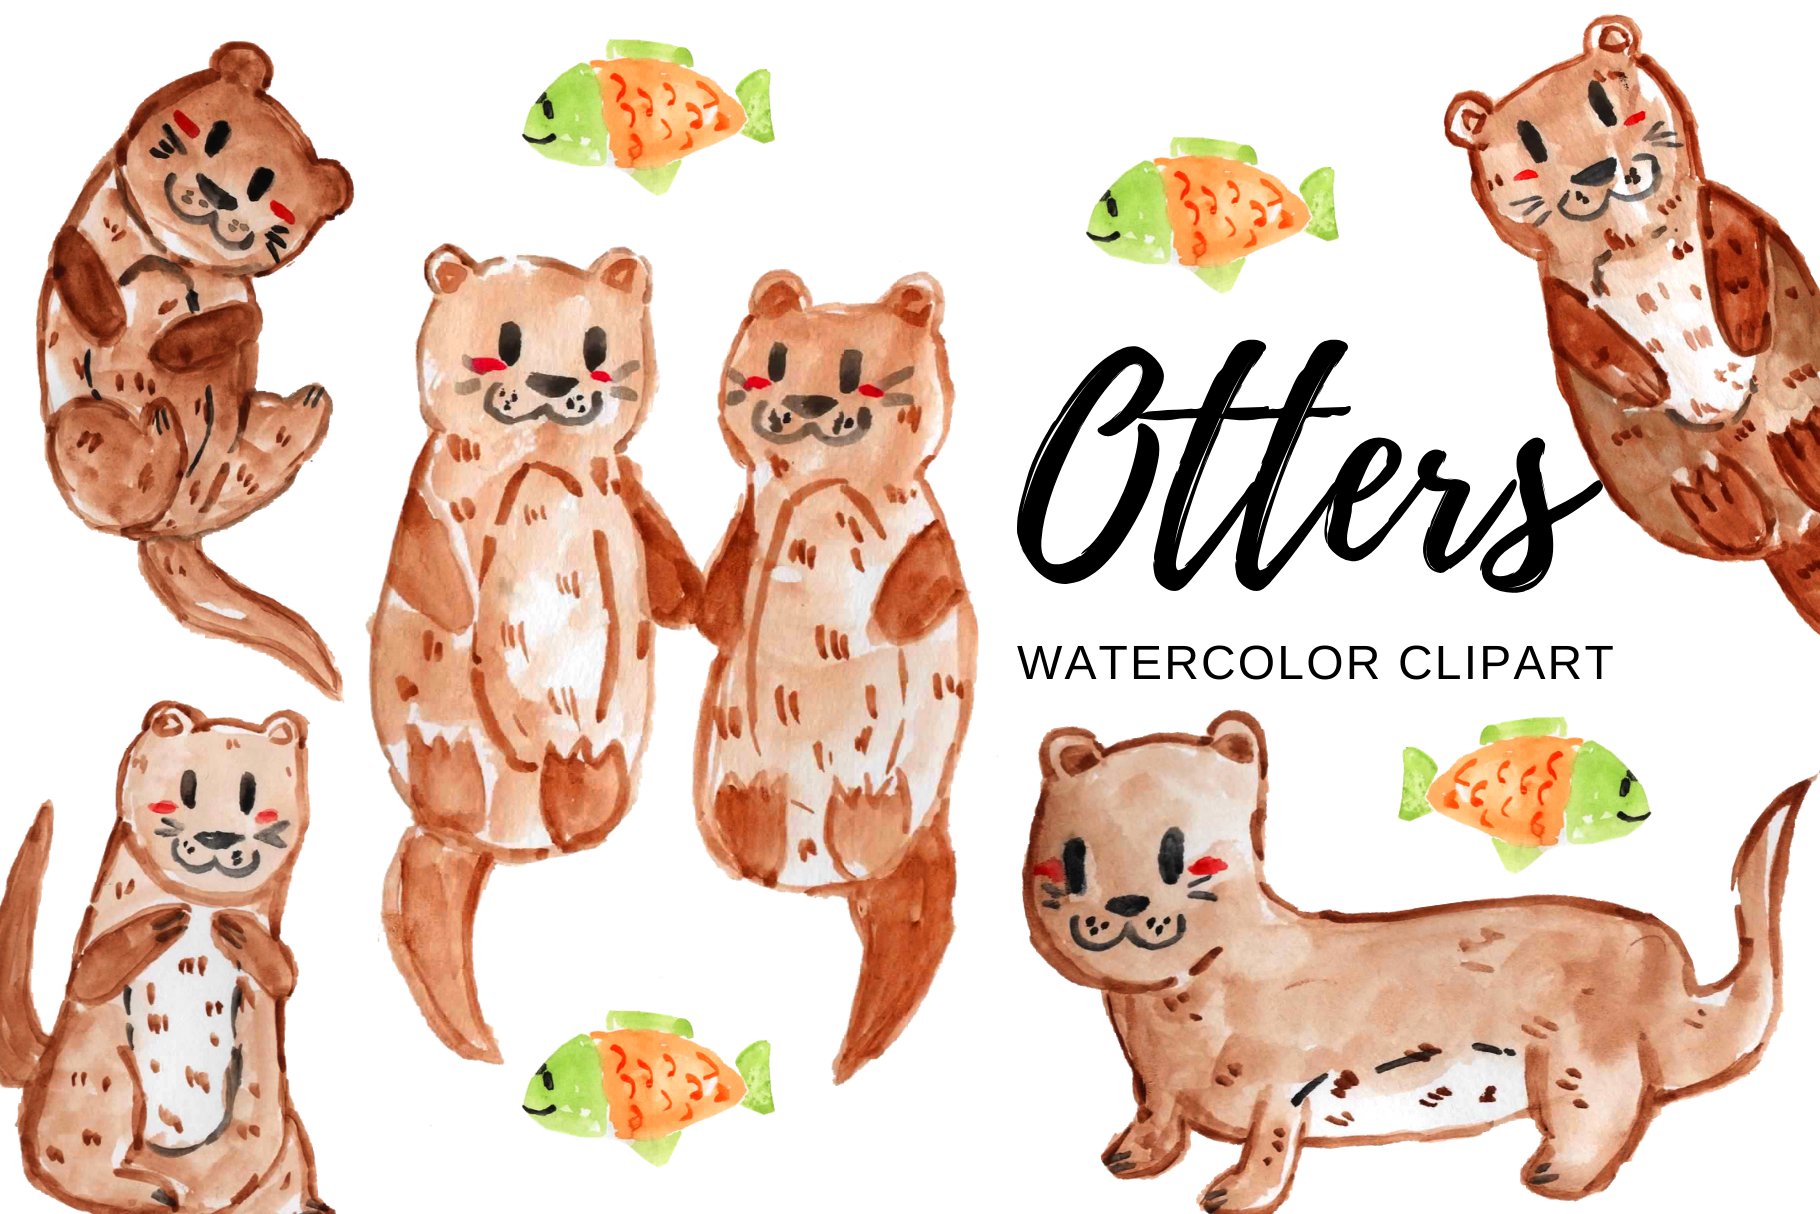 Watercolor Otter clipart cover image.